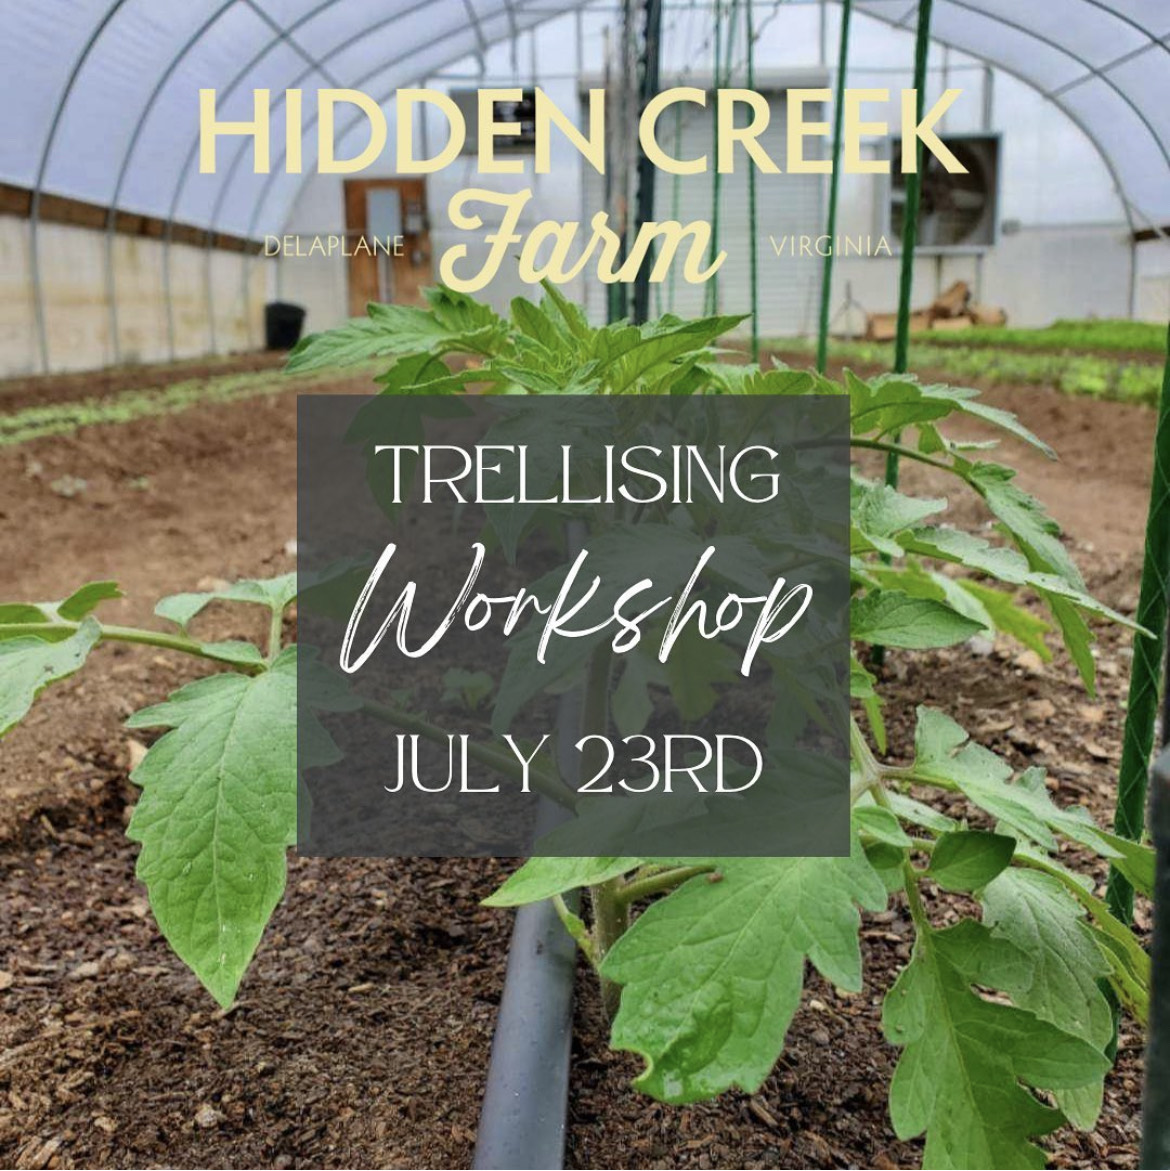 All About Trellising Workshop